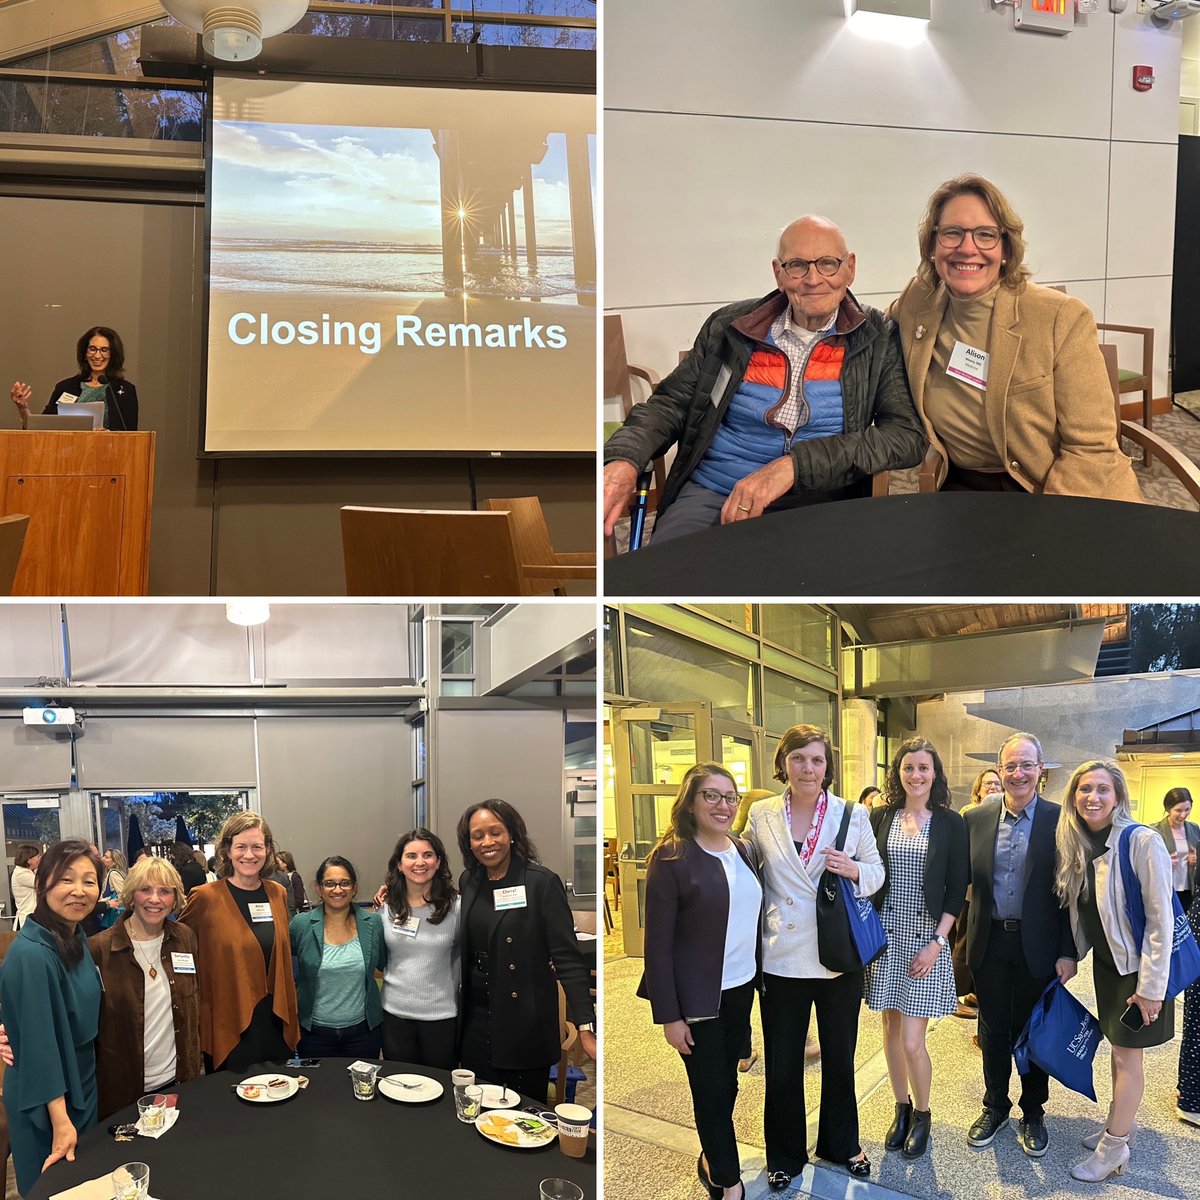 Thank you to our remarkable awardees, new women faculty, speakers, and guests for making the 11th Annual Celebration of @UCSanDiego Health Sciences New Women Faculty and Women Leadership Awards such a success! Looking forward to reuniting at next year’s celebration!